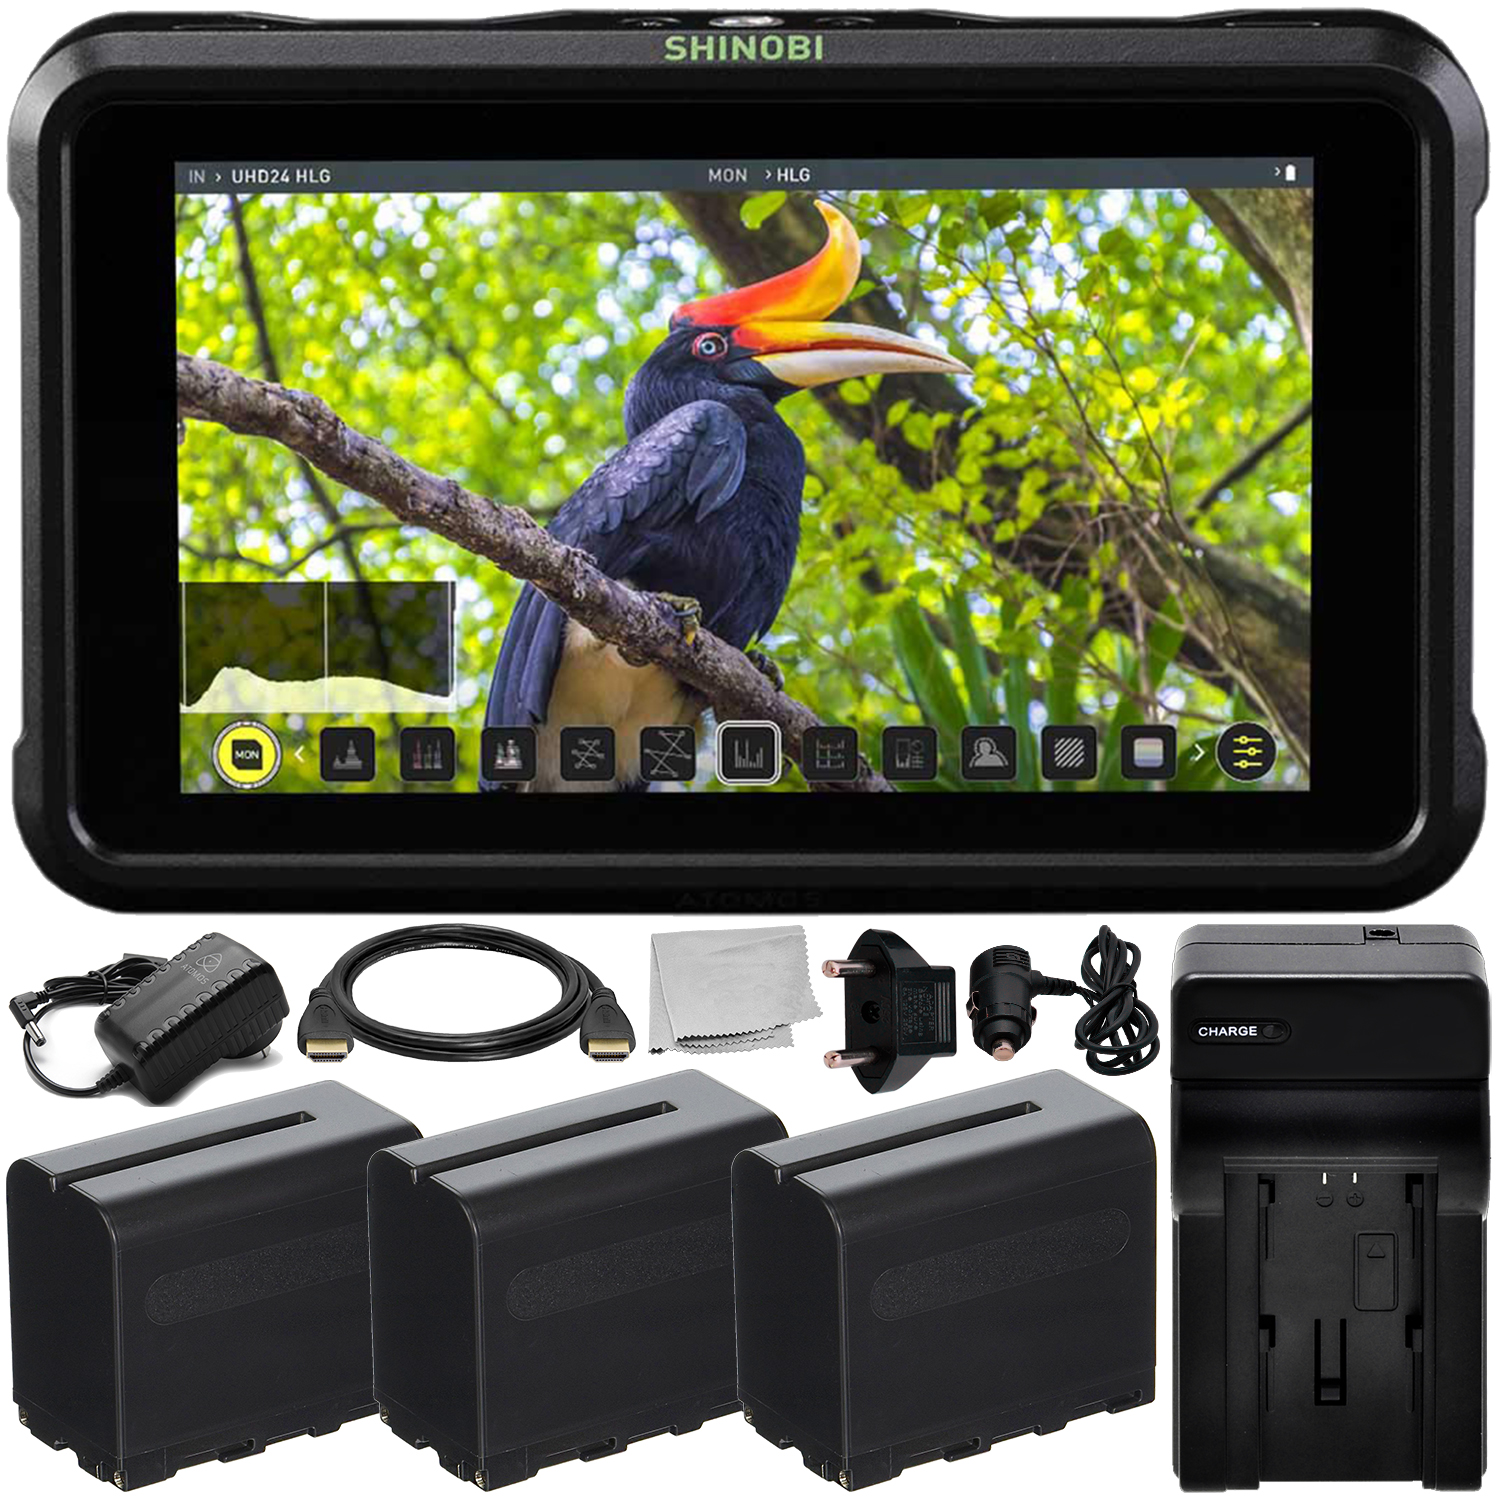 Atomos Shinobi 5.2 4K HDMI Monitor - ATOMSHBH01 With Extended Life  Accessory Bundle